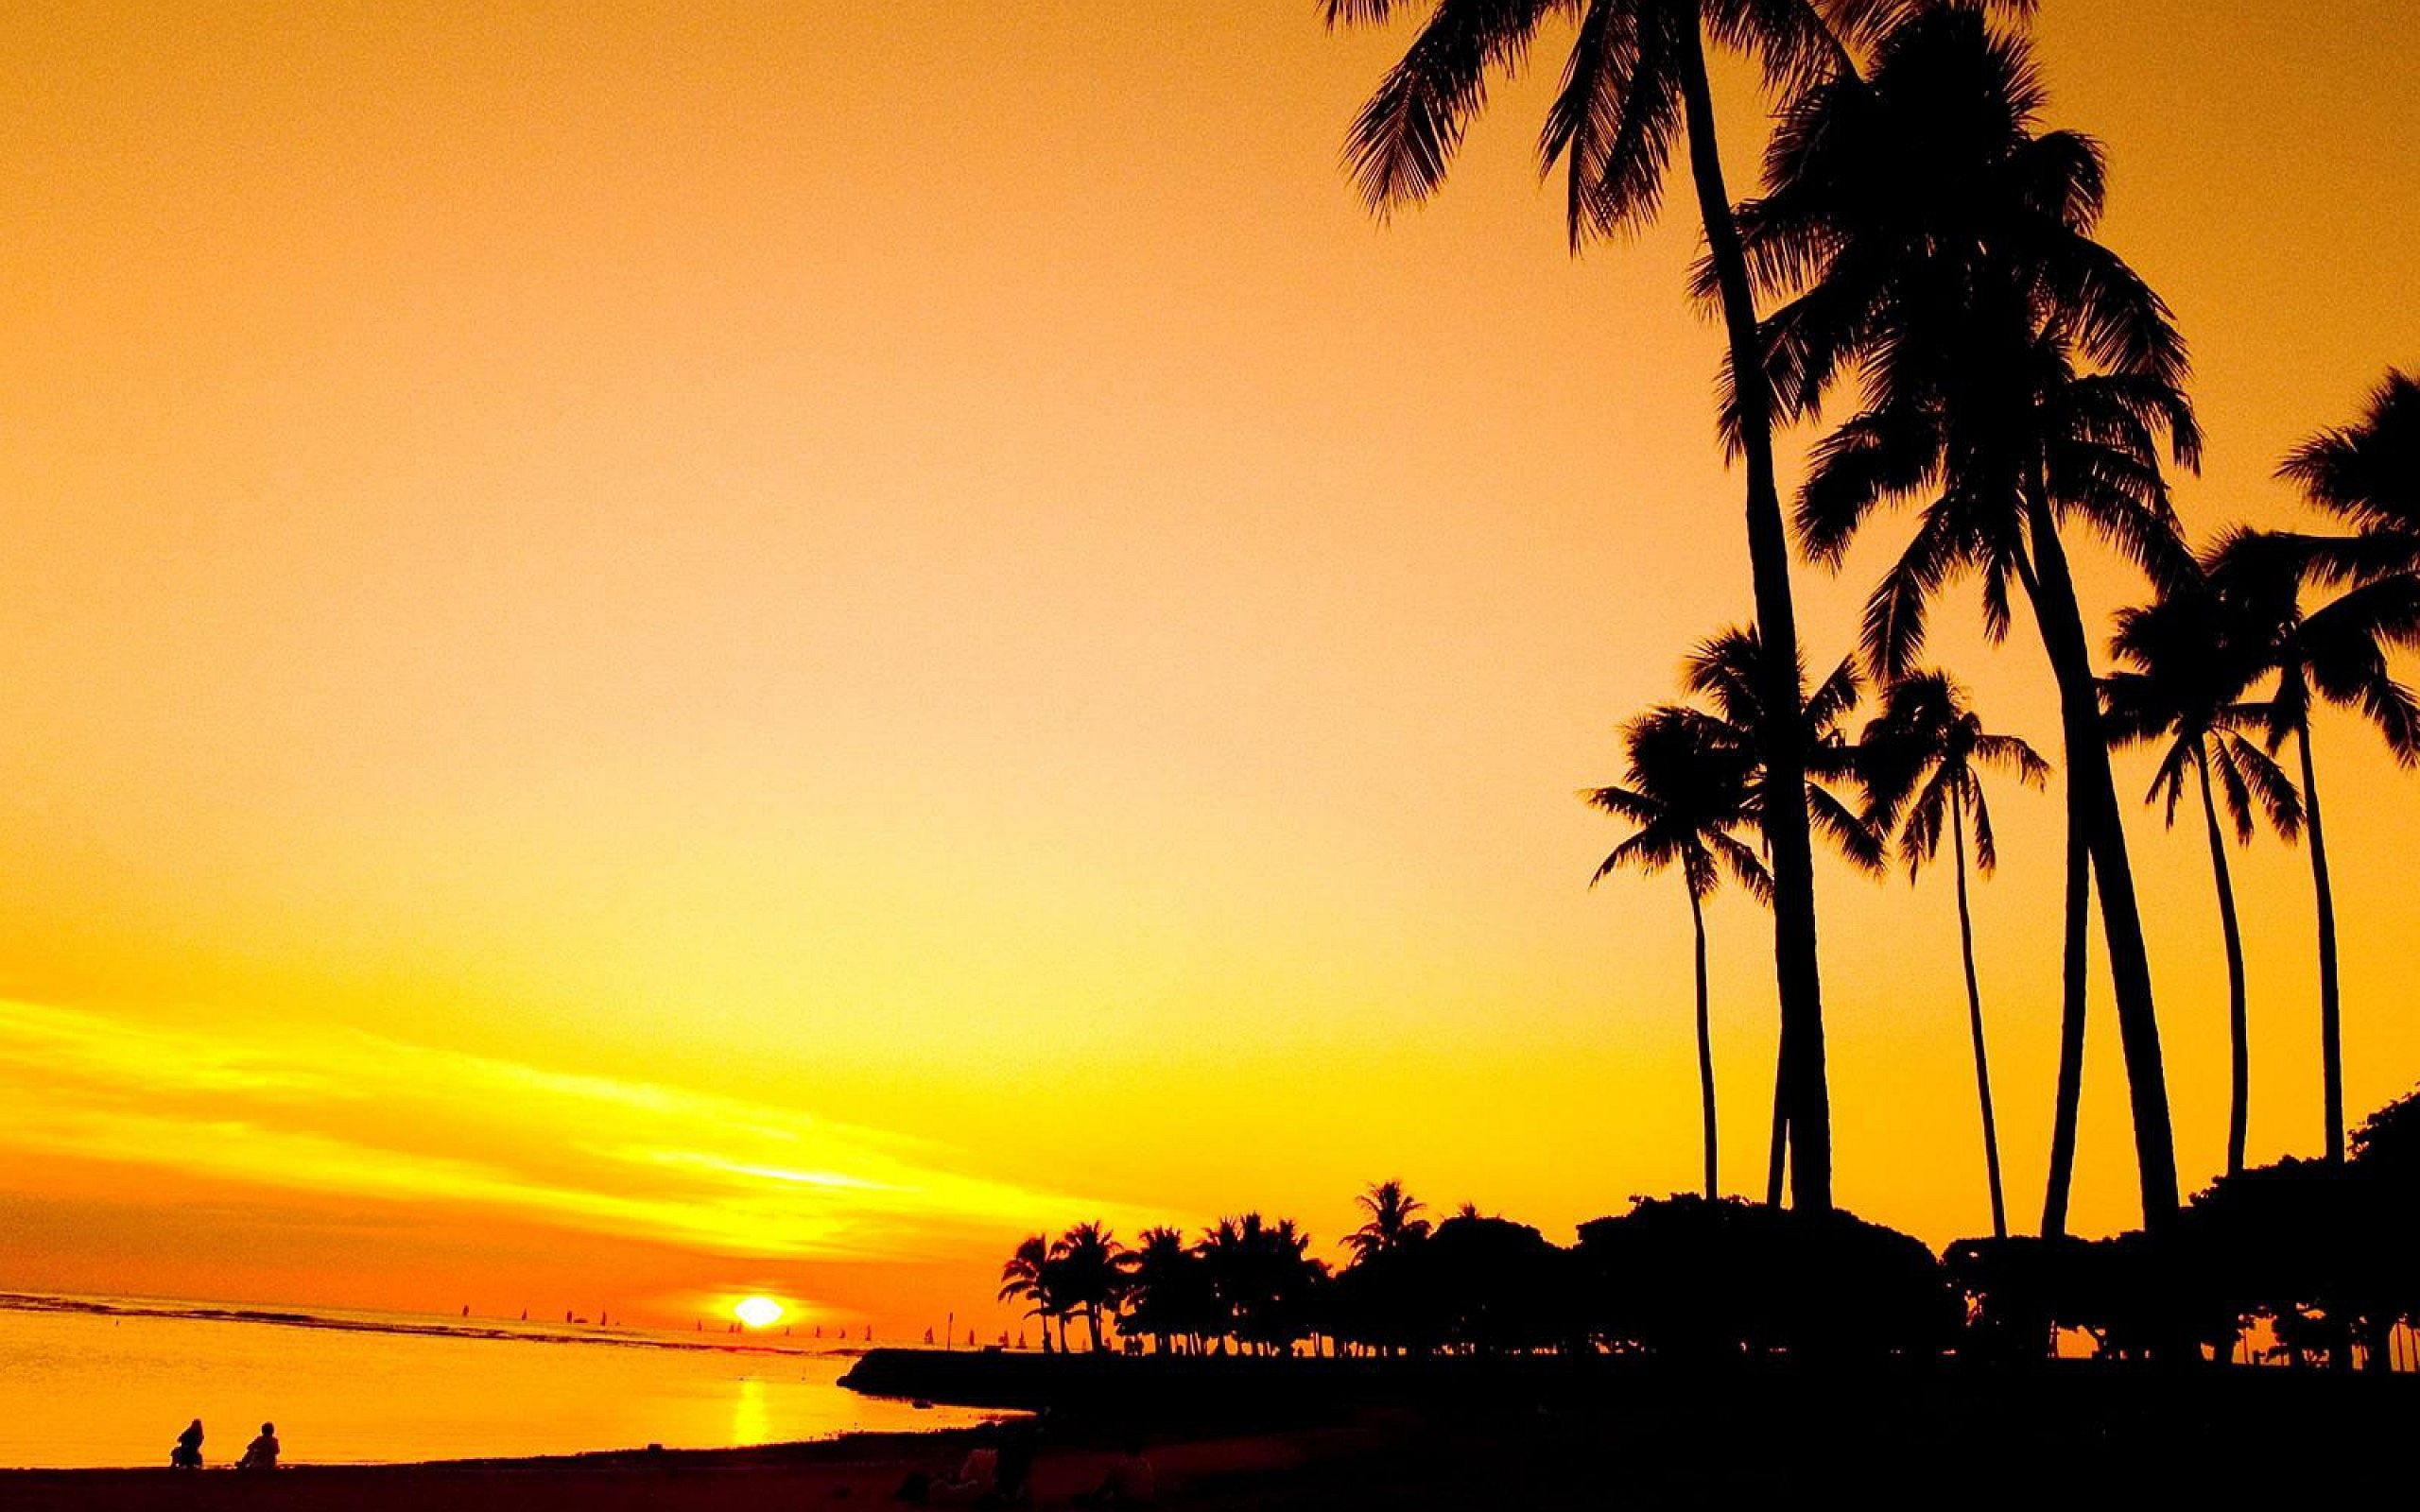 Free download Sunset Palm Beach wallpaper 2560x1600 32113 [2560x1600] for your Desktop, Mobile & Tablet. Explore Palm Beach Wallpaper. Palm Beach Wallpaper, Palm Tree Beach Wallpaper, Beach Palm Trees Wallpaper